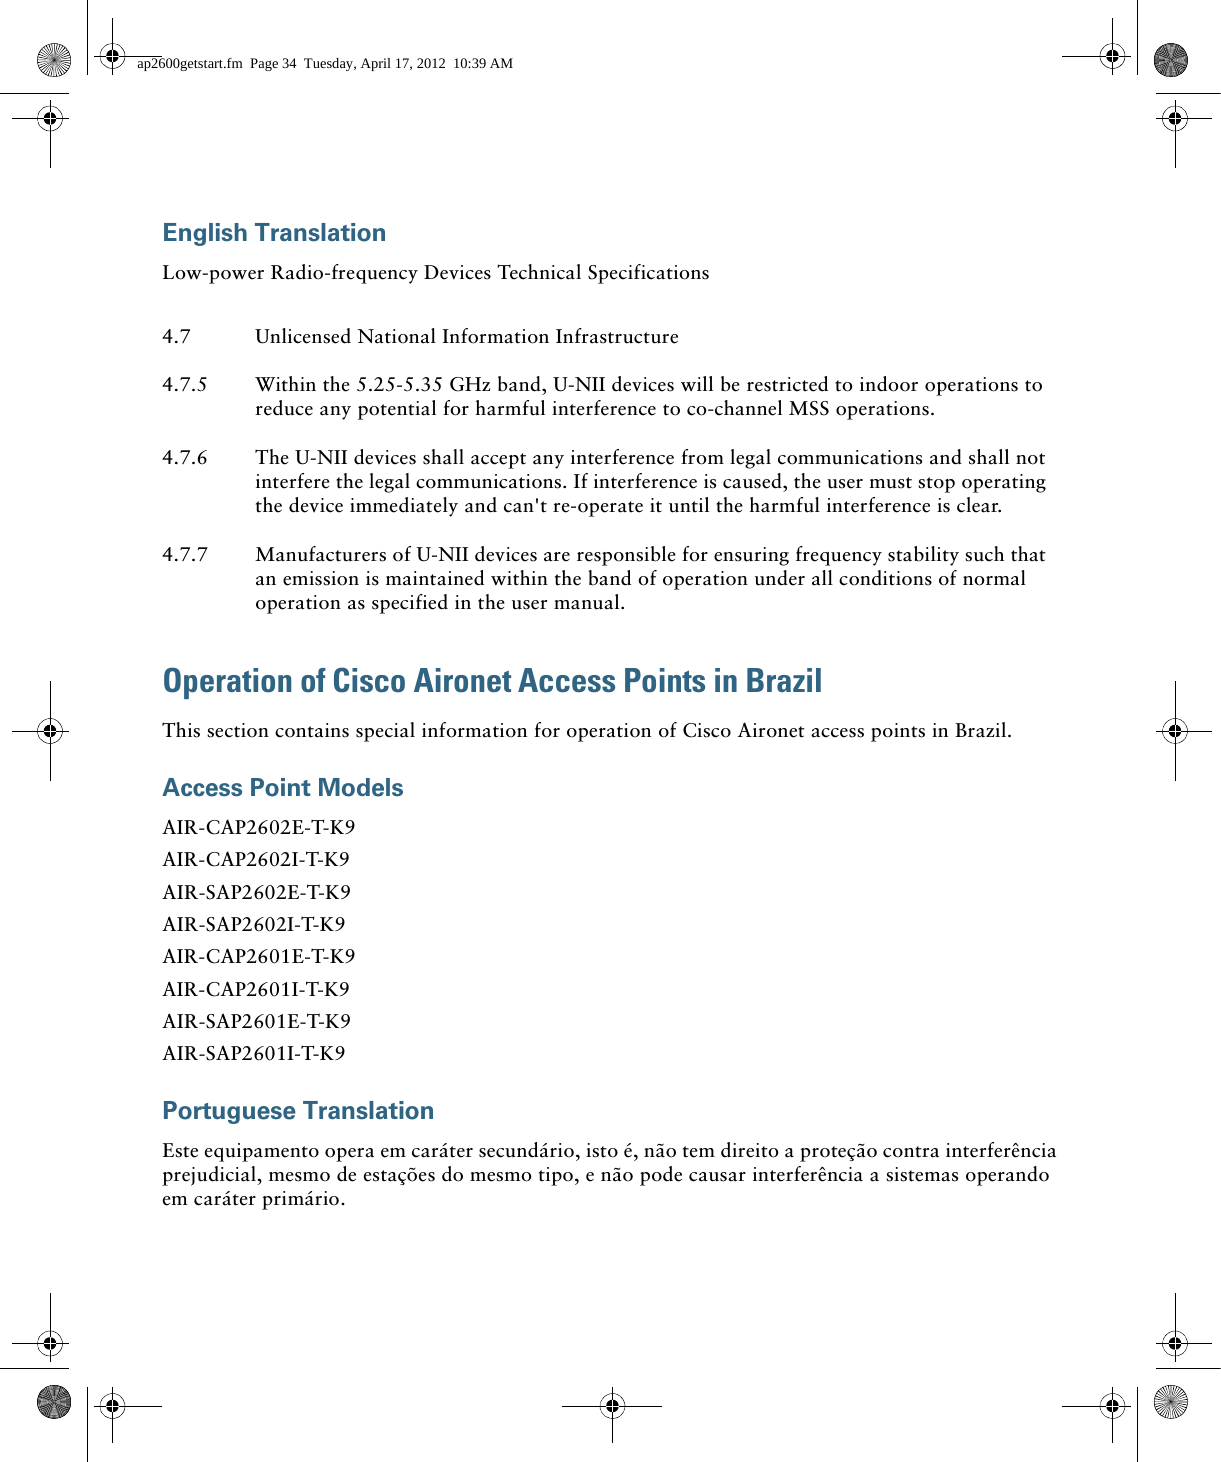  English TranslationLow-power Radio-frequency Devices Technical SpecificationsOperation of Cisco Aironet Access Points in BrazilThis section contains special information for operation of Cisco Aironet access points in Brazil.Access Point ModelsAIR-CAP2602E-T-K9AIR-CAP2602I-T-K9AIR-SAP2602E-T-K9AIR-SAP2602I-T-K9AIR-CAP2601E-T-K9AIR-CAP2601I-T-K9AIR-SAP2601E-T-K9AIR-SAP2601I-T-K9Portuguese TranslationEste equipamento opera em caráter secundário, isto é, não tem direito a proteção contra interferência prejudicial, mesmo de estações do mesmo tipo, e não pode causar interferência a sistemas operando em caráter primário.4.7 Unlicensed National Information Infrastructure4.7.5 Within the 5.25-5.35 GHz band, U-NII devices will be restricted to indoor operations to reduce any potential for harmful interference to co-channel MSS operations.4.7.6 The U-NII devices shall accept any interference from legal communications and shall not interfere the legal communications. If interference is caused, the user must stop operating the device immediately and can&apos;t re-operate it until the harmful interference is clear.4.7.7 Manufacturers of U-NII devices are responsible for ensuring frequency stability such that an emission is maintained within the band of operation under all conditions of normal operation as specified in the user manual.ap2600getstart.fm  Page 34  Tuesday, April 17, 2012  10:39 AM